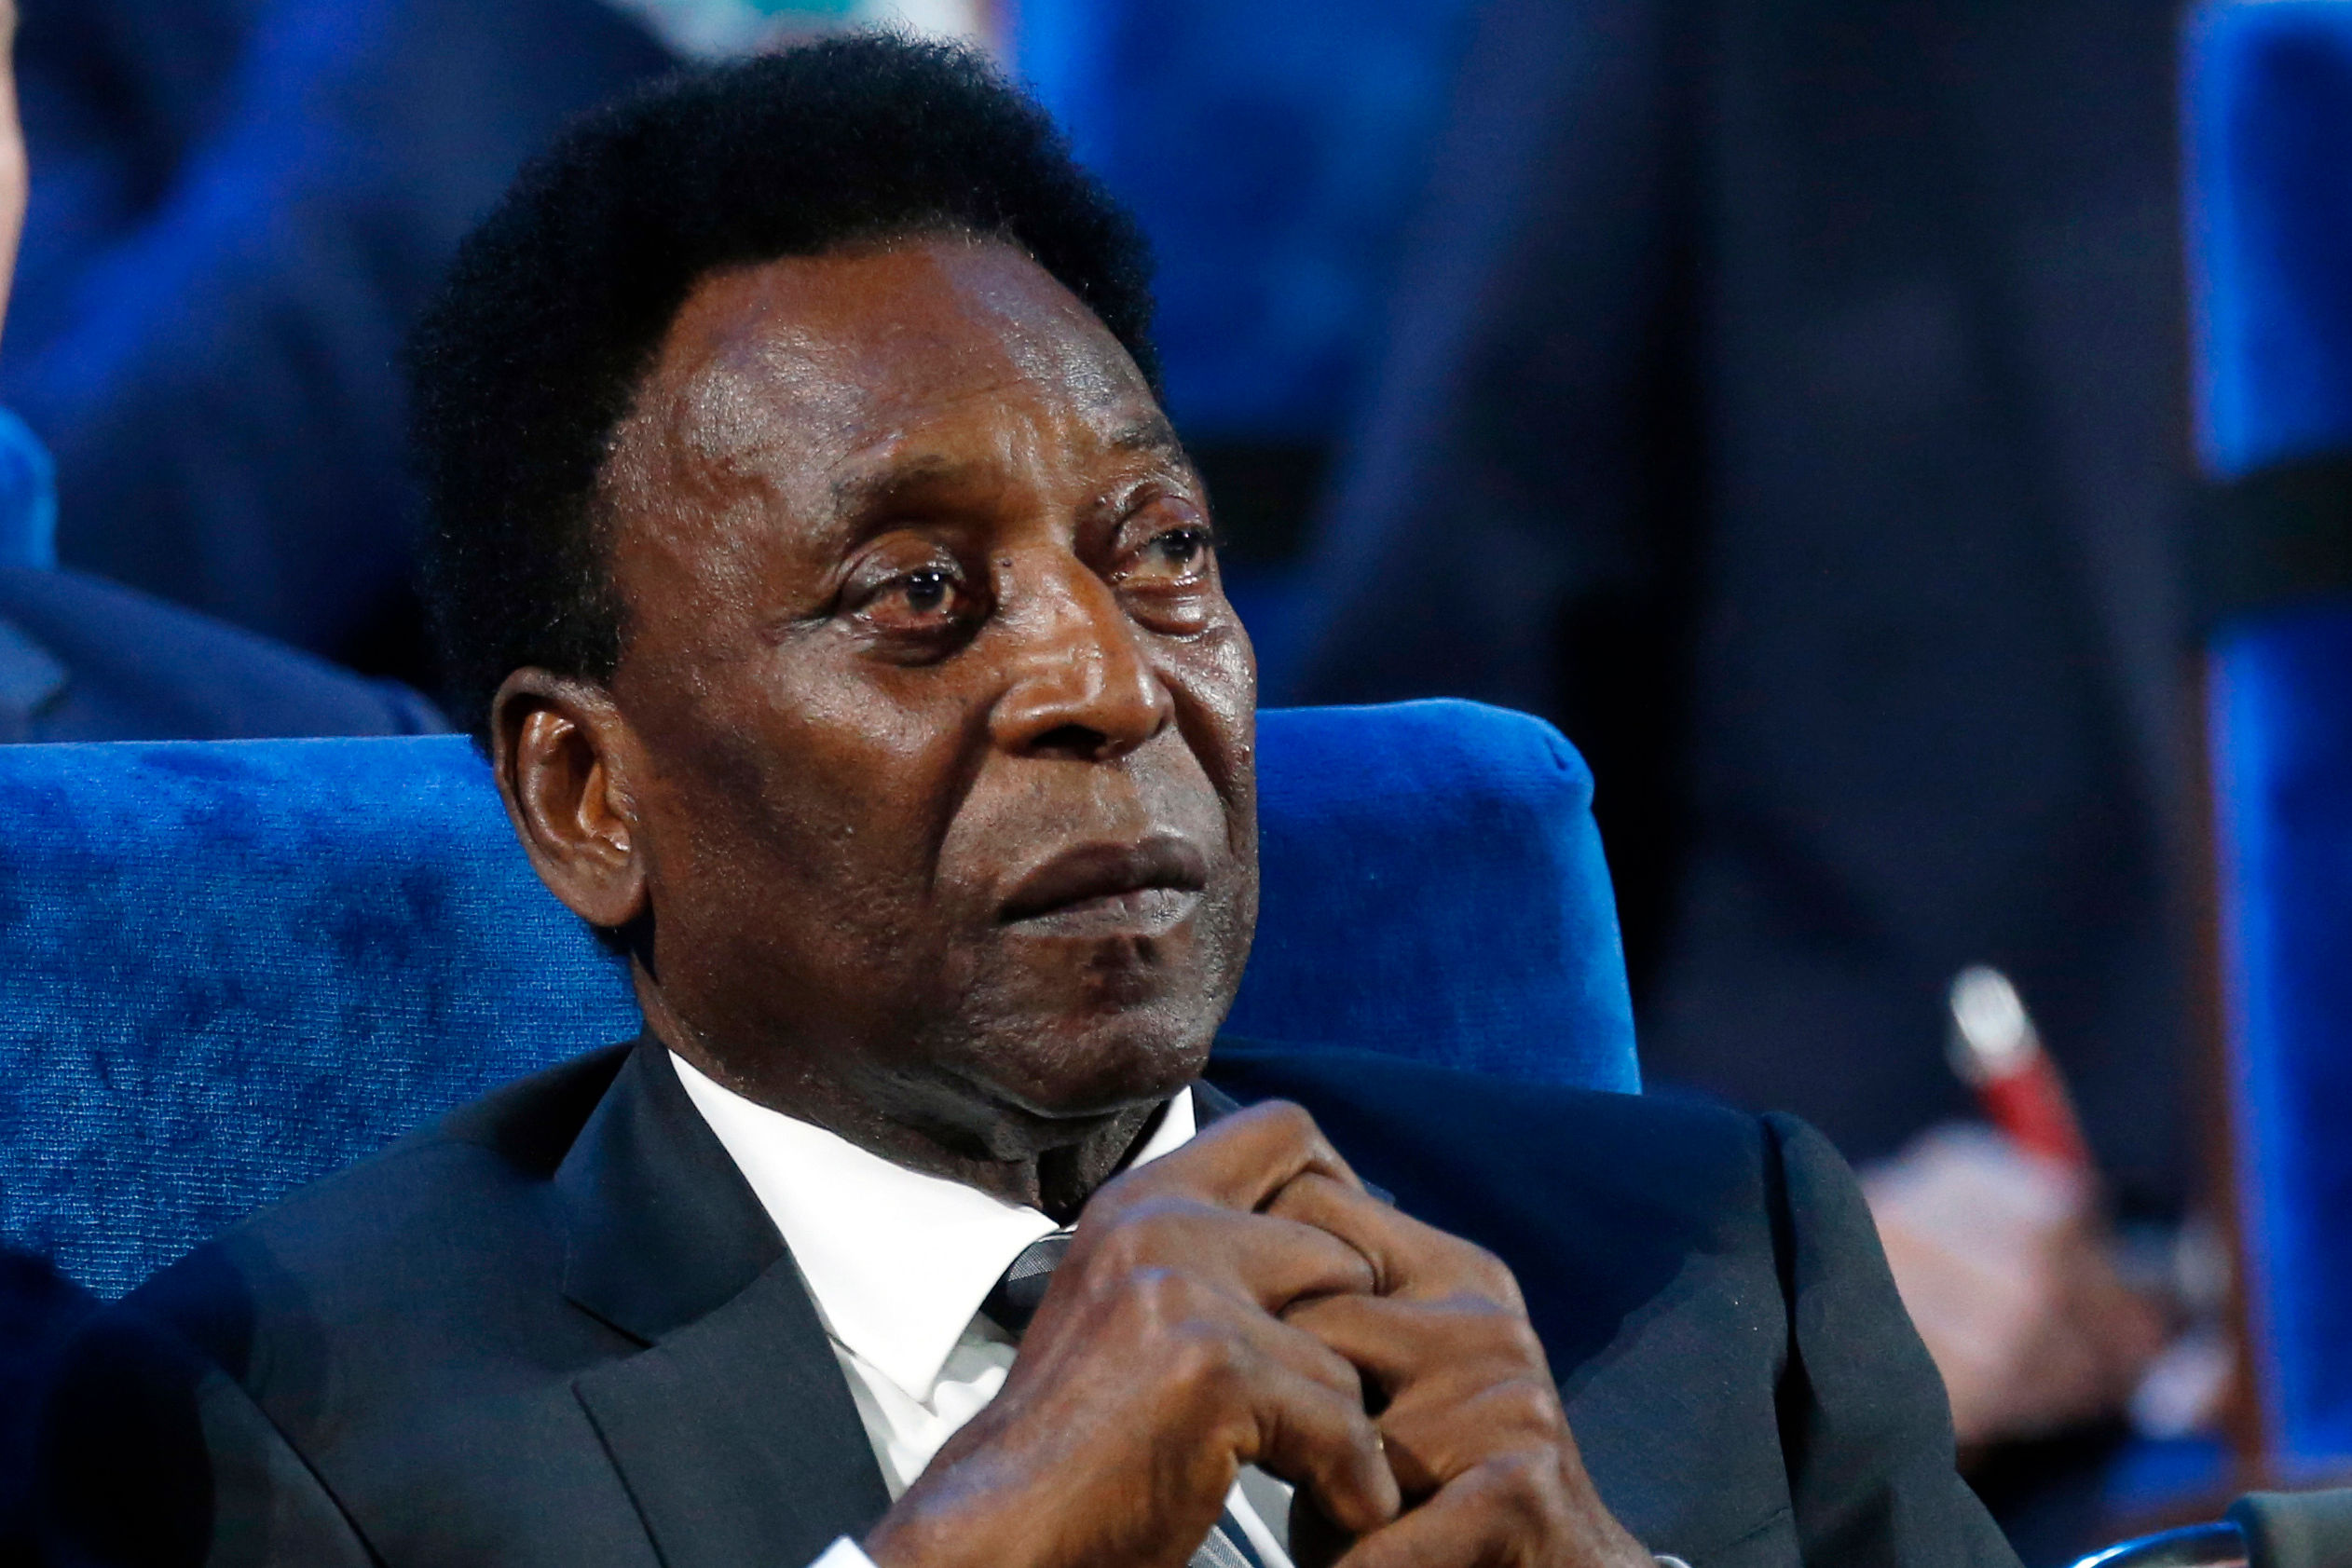 Football icon Pele ‘took a little step back’ but is recovering well, says daughter